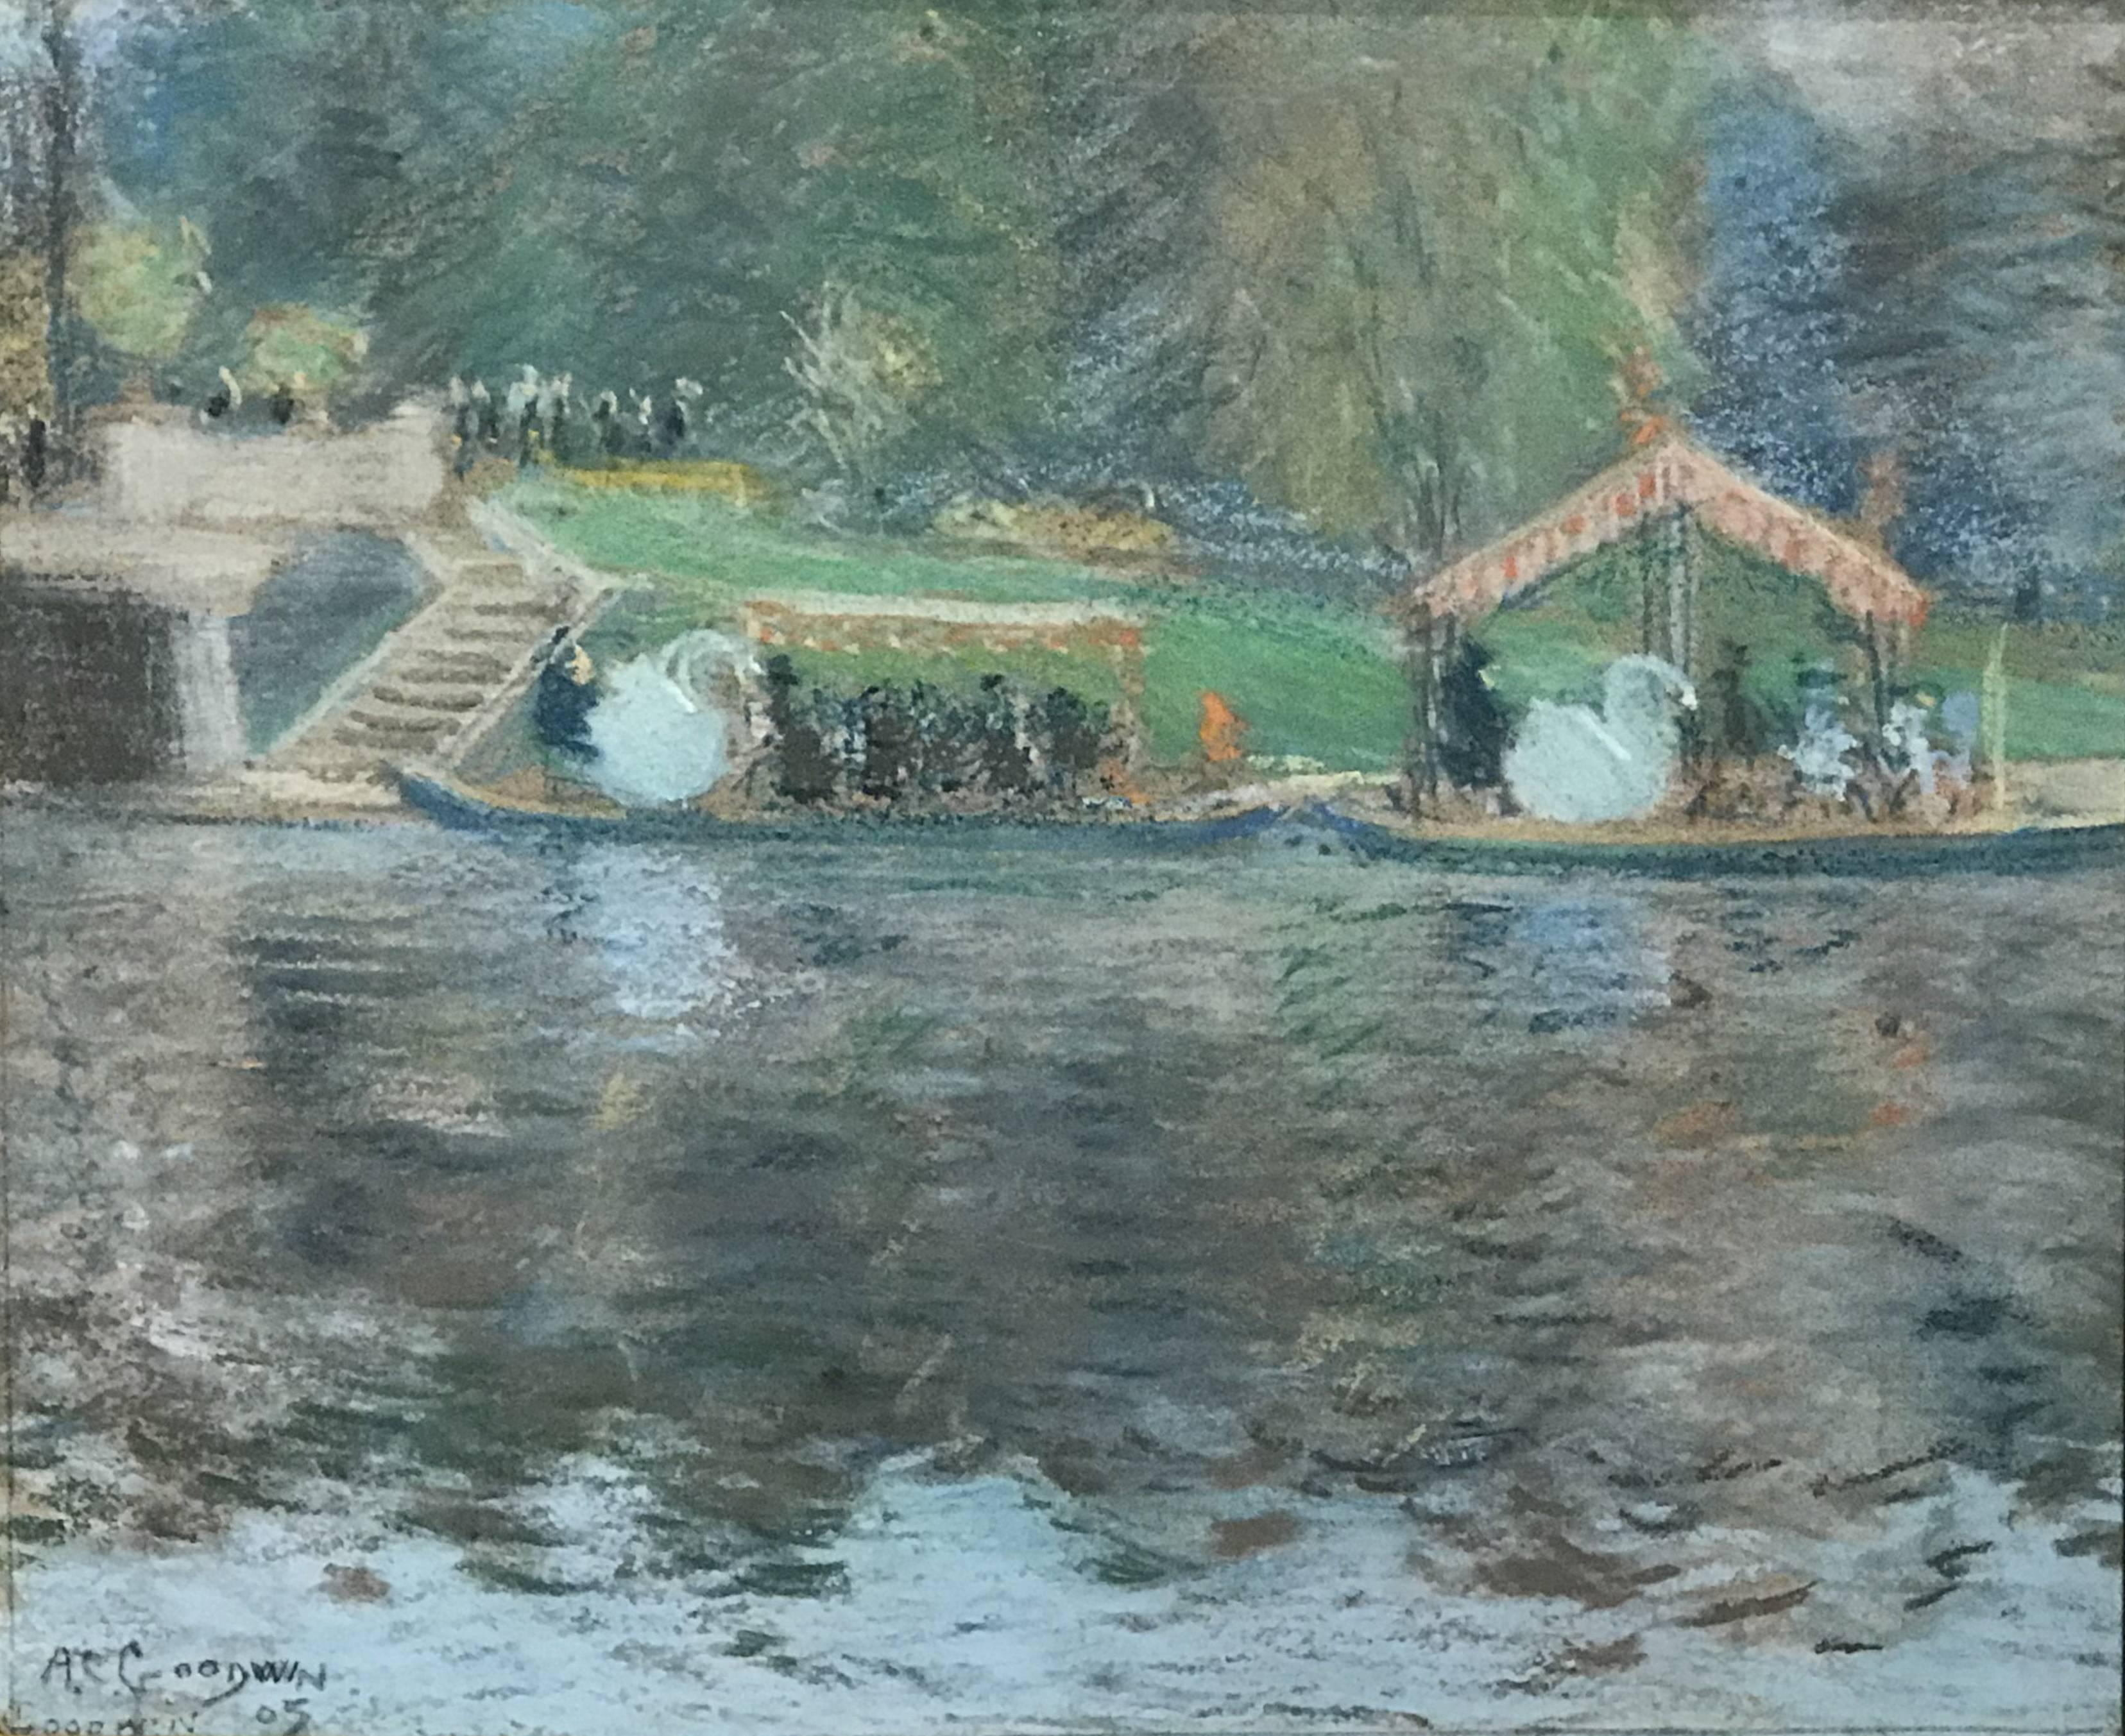 A fine impressionist pastel painting of the Boston Common swan boats by American artist Arthur Clifton Goodwin (1864-1929). Born in Portsmouth, New Hampshire, Goodwin lived and worked most of his life in Massachusetts and New York and is best known